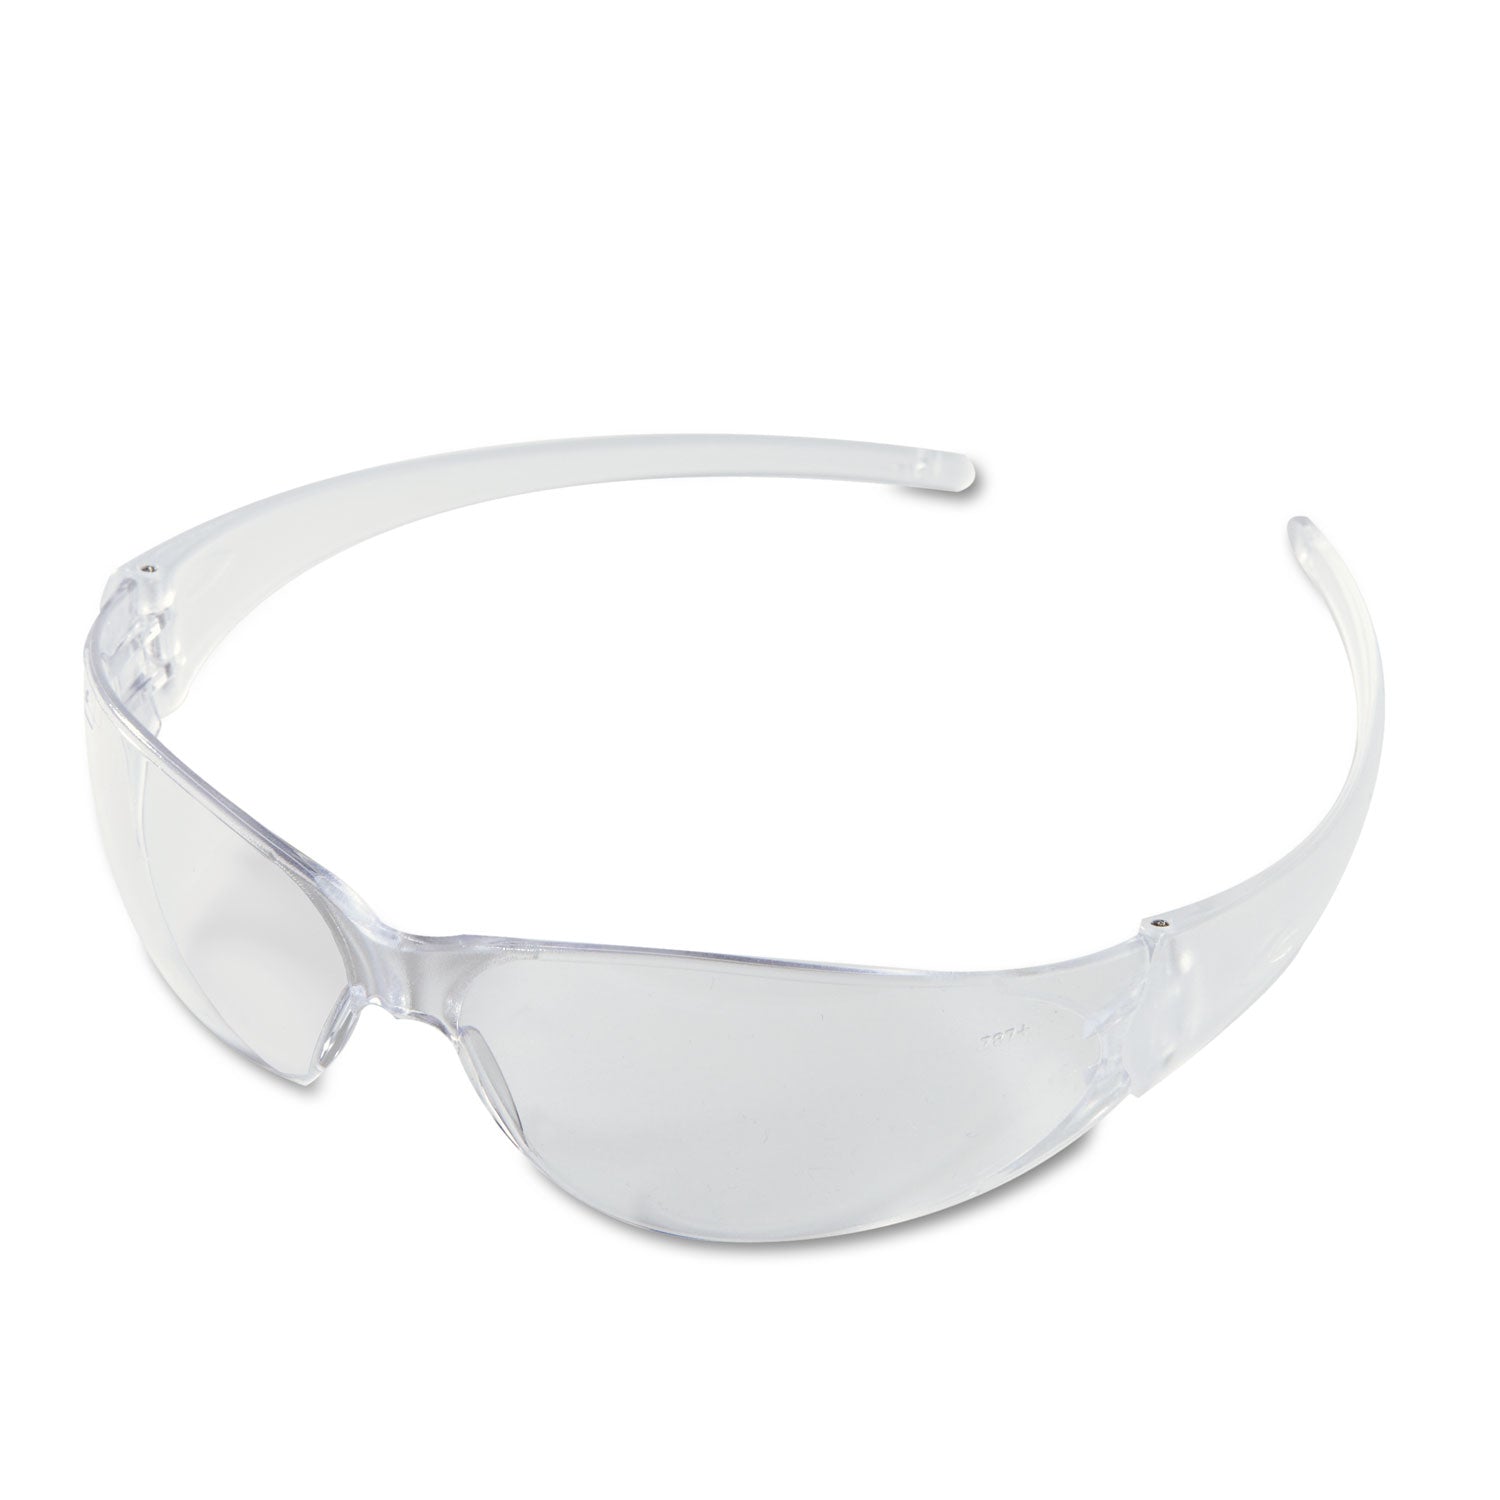 Checkmate Wraparound Safety Glasses, CLR Polycarbonate Frame, Coated Clear Lens - 